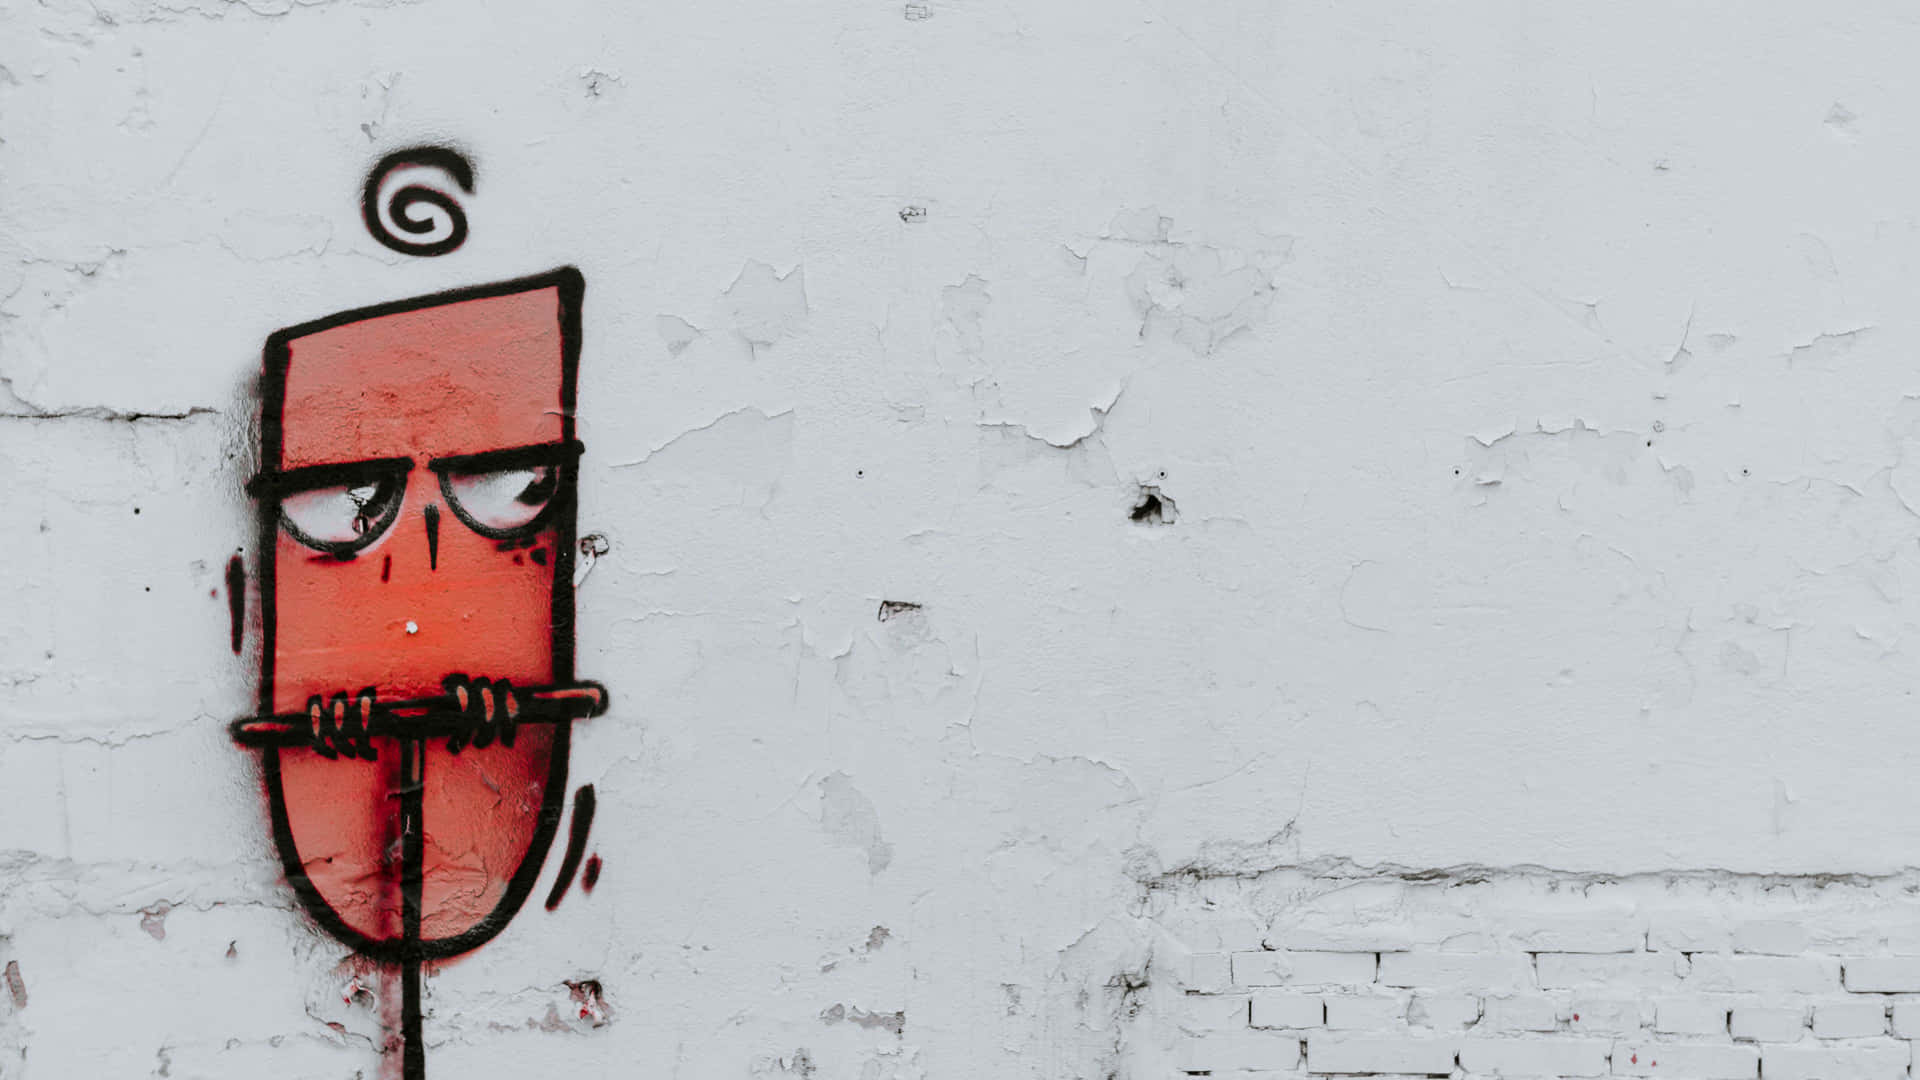 Graffiti Wall Art With A Square Face And Locked Mouth Wallpaper